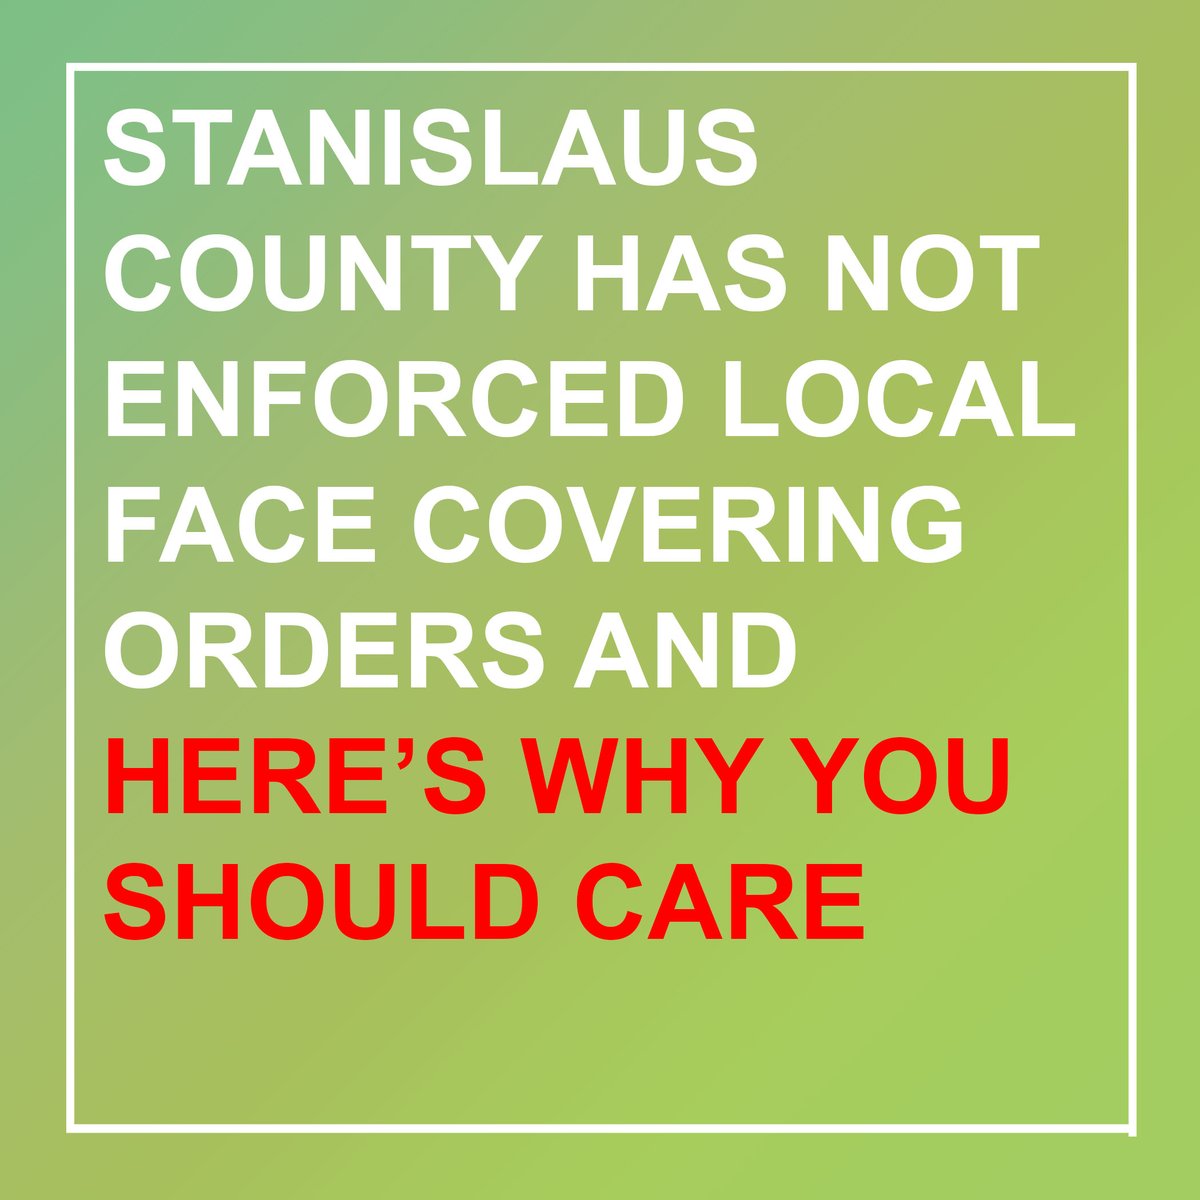 (1/8) A thread about what's happening with COVID-19 in Stanislaus County: